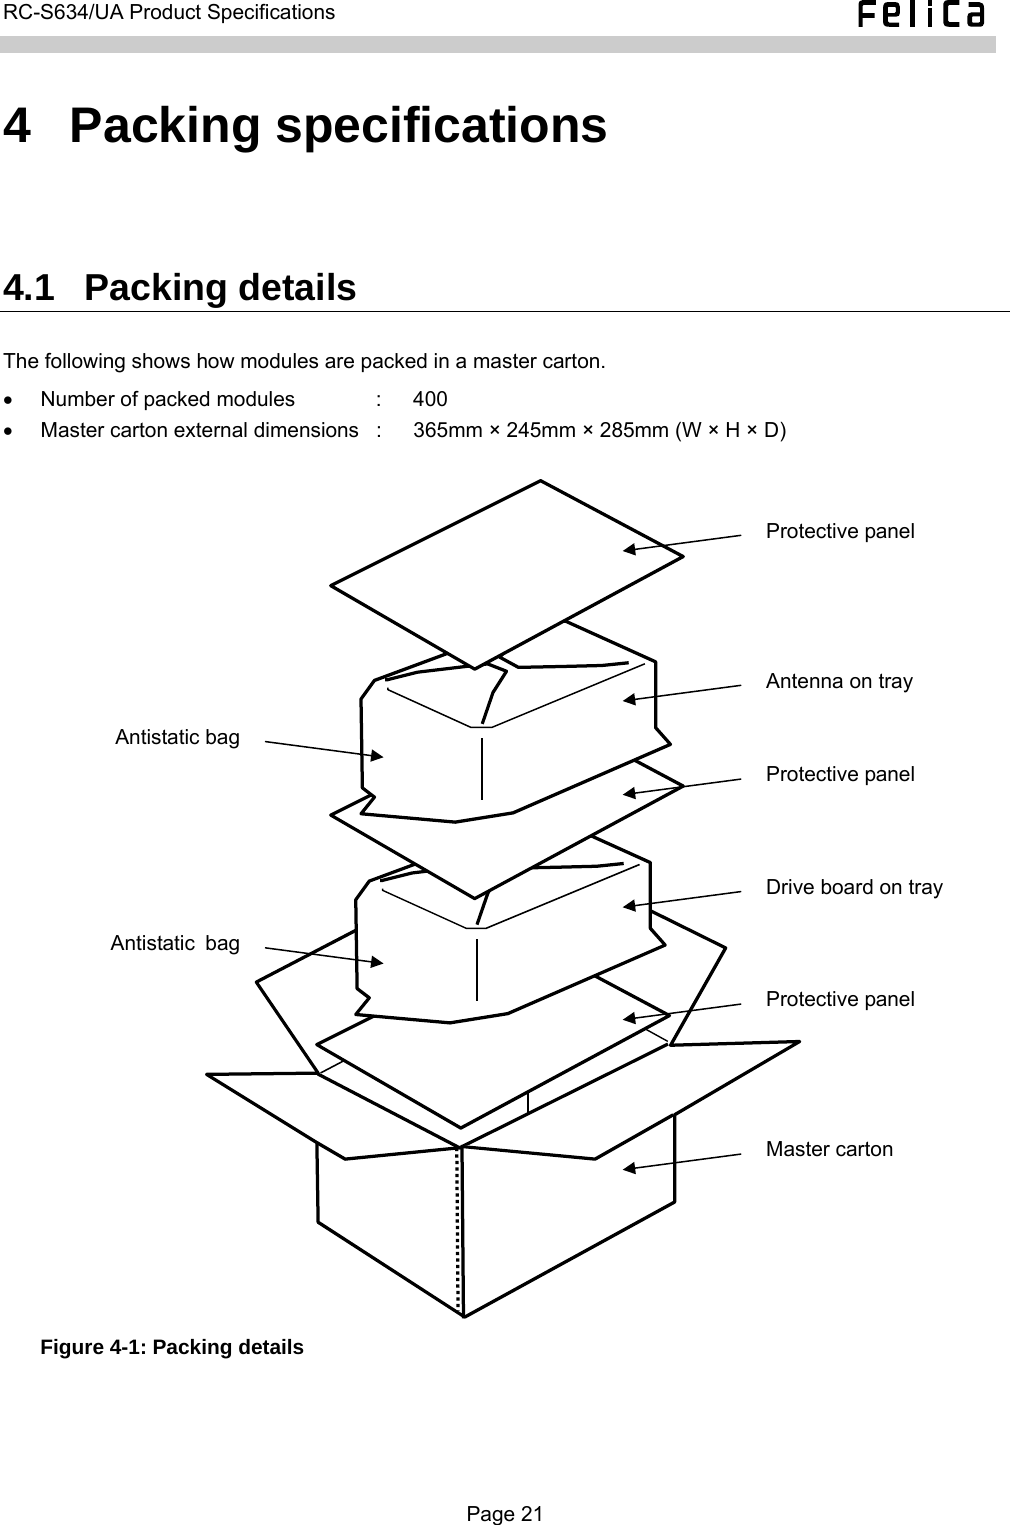   RC-S634/UA Product Specifications  4  Packing specifications 4.1  Packing details The following shows how modules are packed in a master carton. •  Number of packed modules     :  400 •  Master carton external dimensions  :  365mm × 245mm × 285mm (W × H × D)  Drive board on trayAntenna on tray Protective panel Antistatic bag Master carton Antistatic bag Protective panel Protective panel  Figure 4-1: Packing details  Page 21  